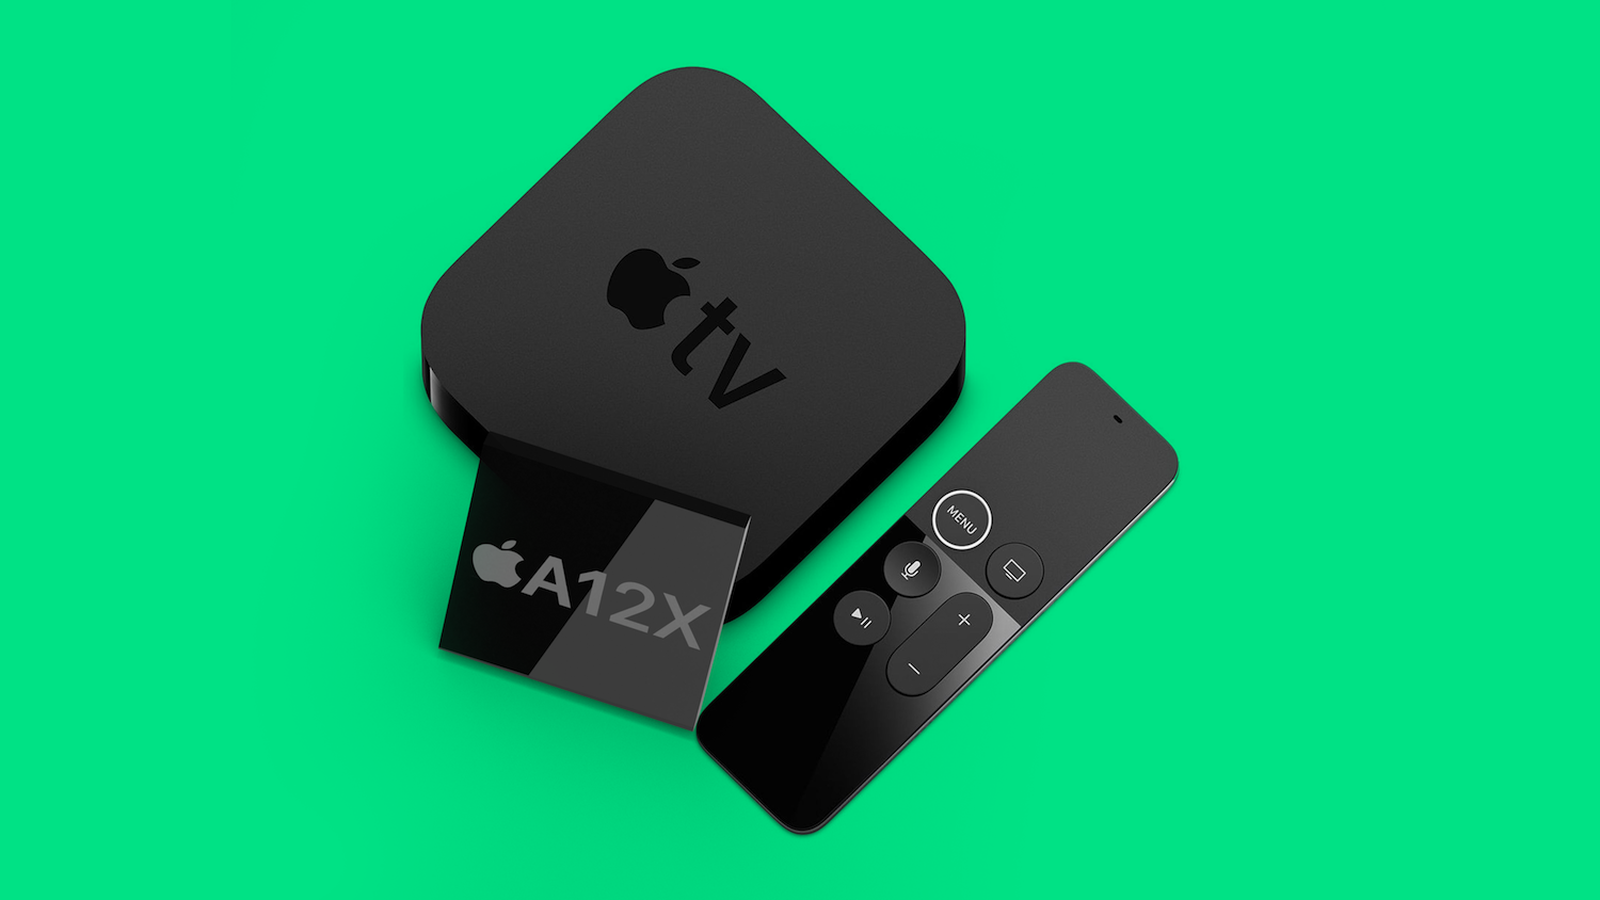 Rumor Suggests New Apple TV 4K With A12X Chip is 'Ready to Ship